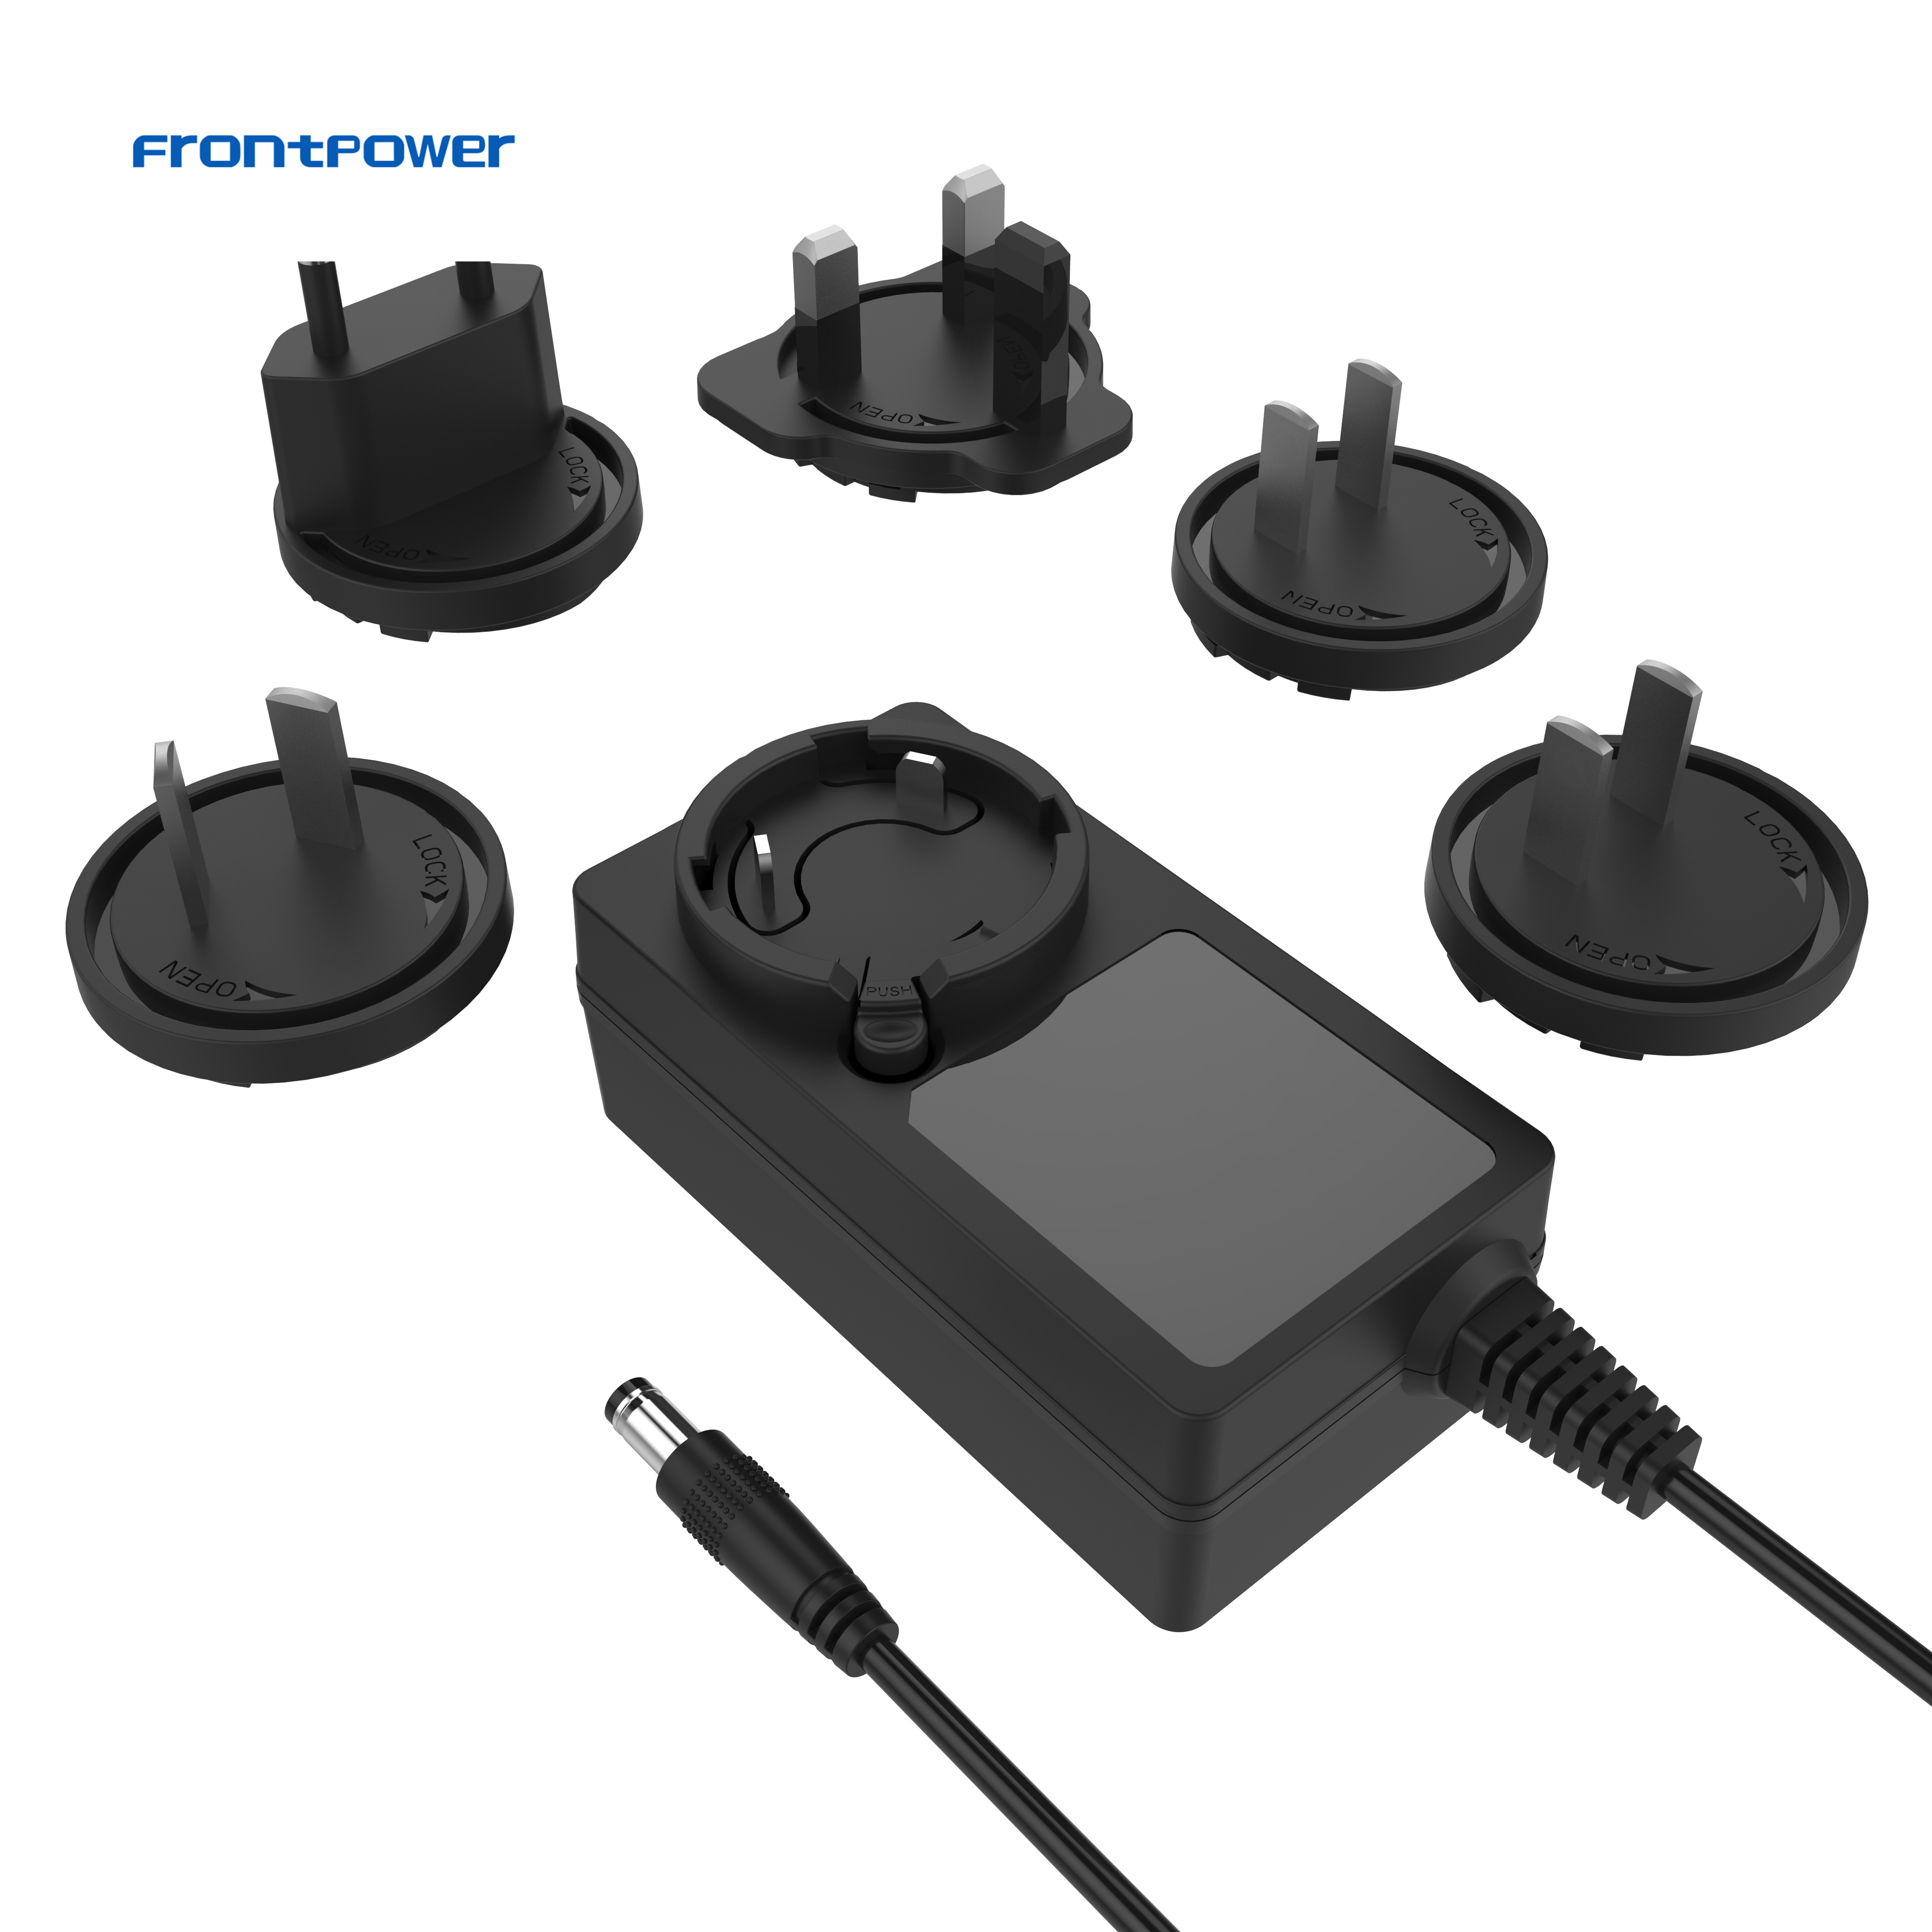 5V 9V 9.3V 12V 15V 24V 1.5A 2.4A 3A 4A 5A 6A US EU UK AU PSE Plug Power Adapter Supply for Laptop